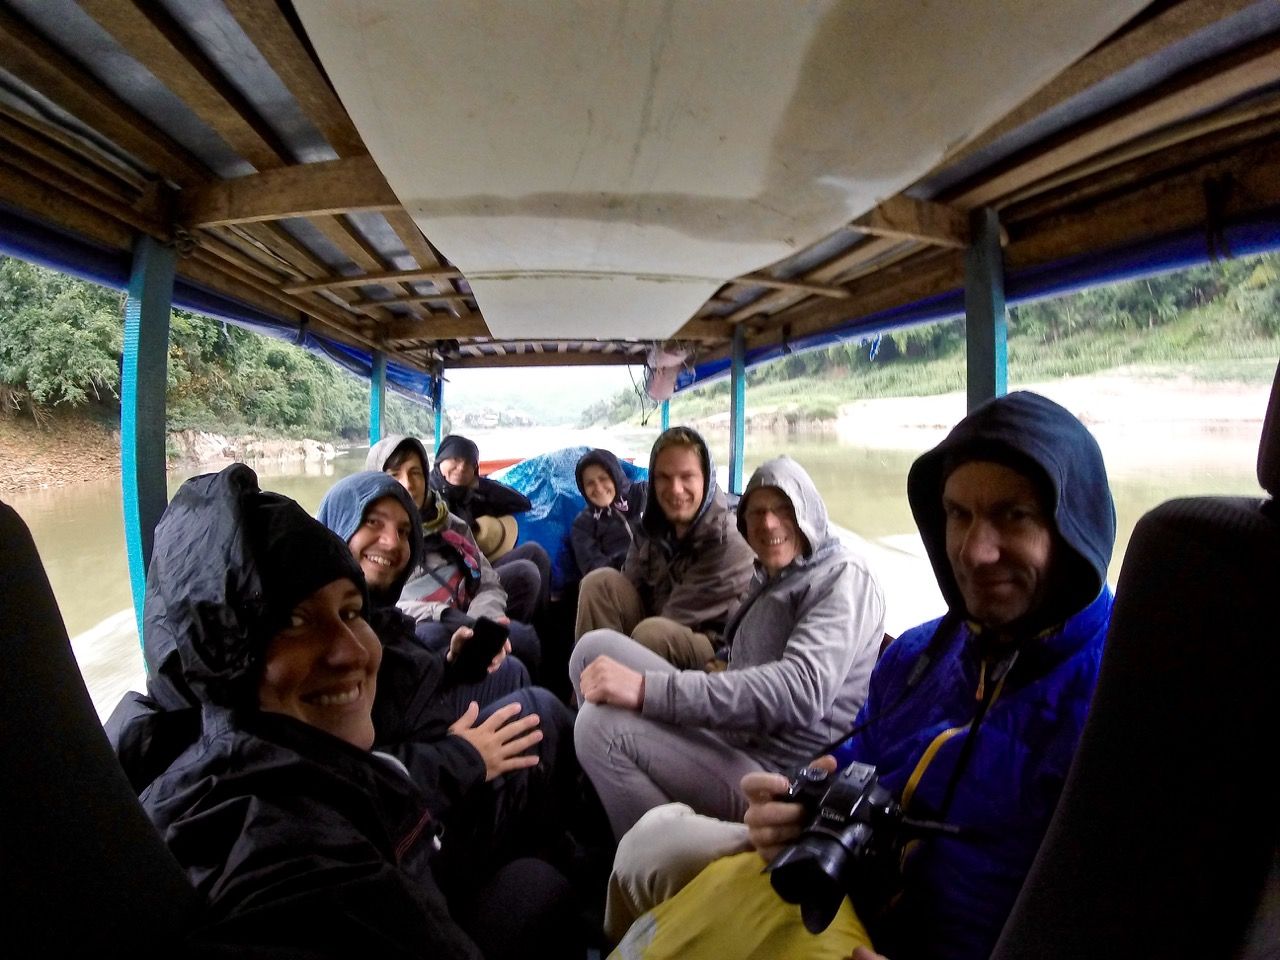 Group of people inside a slow boat.